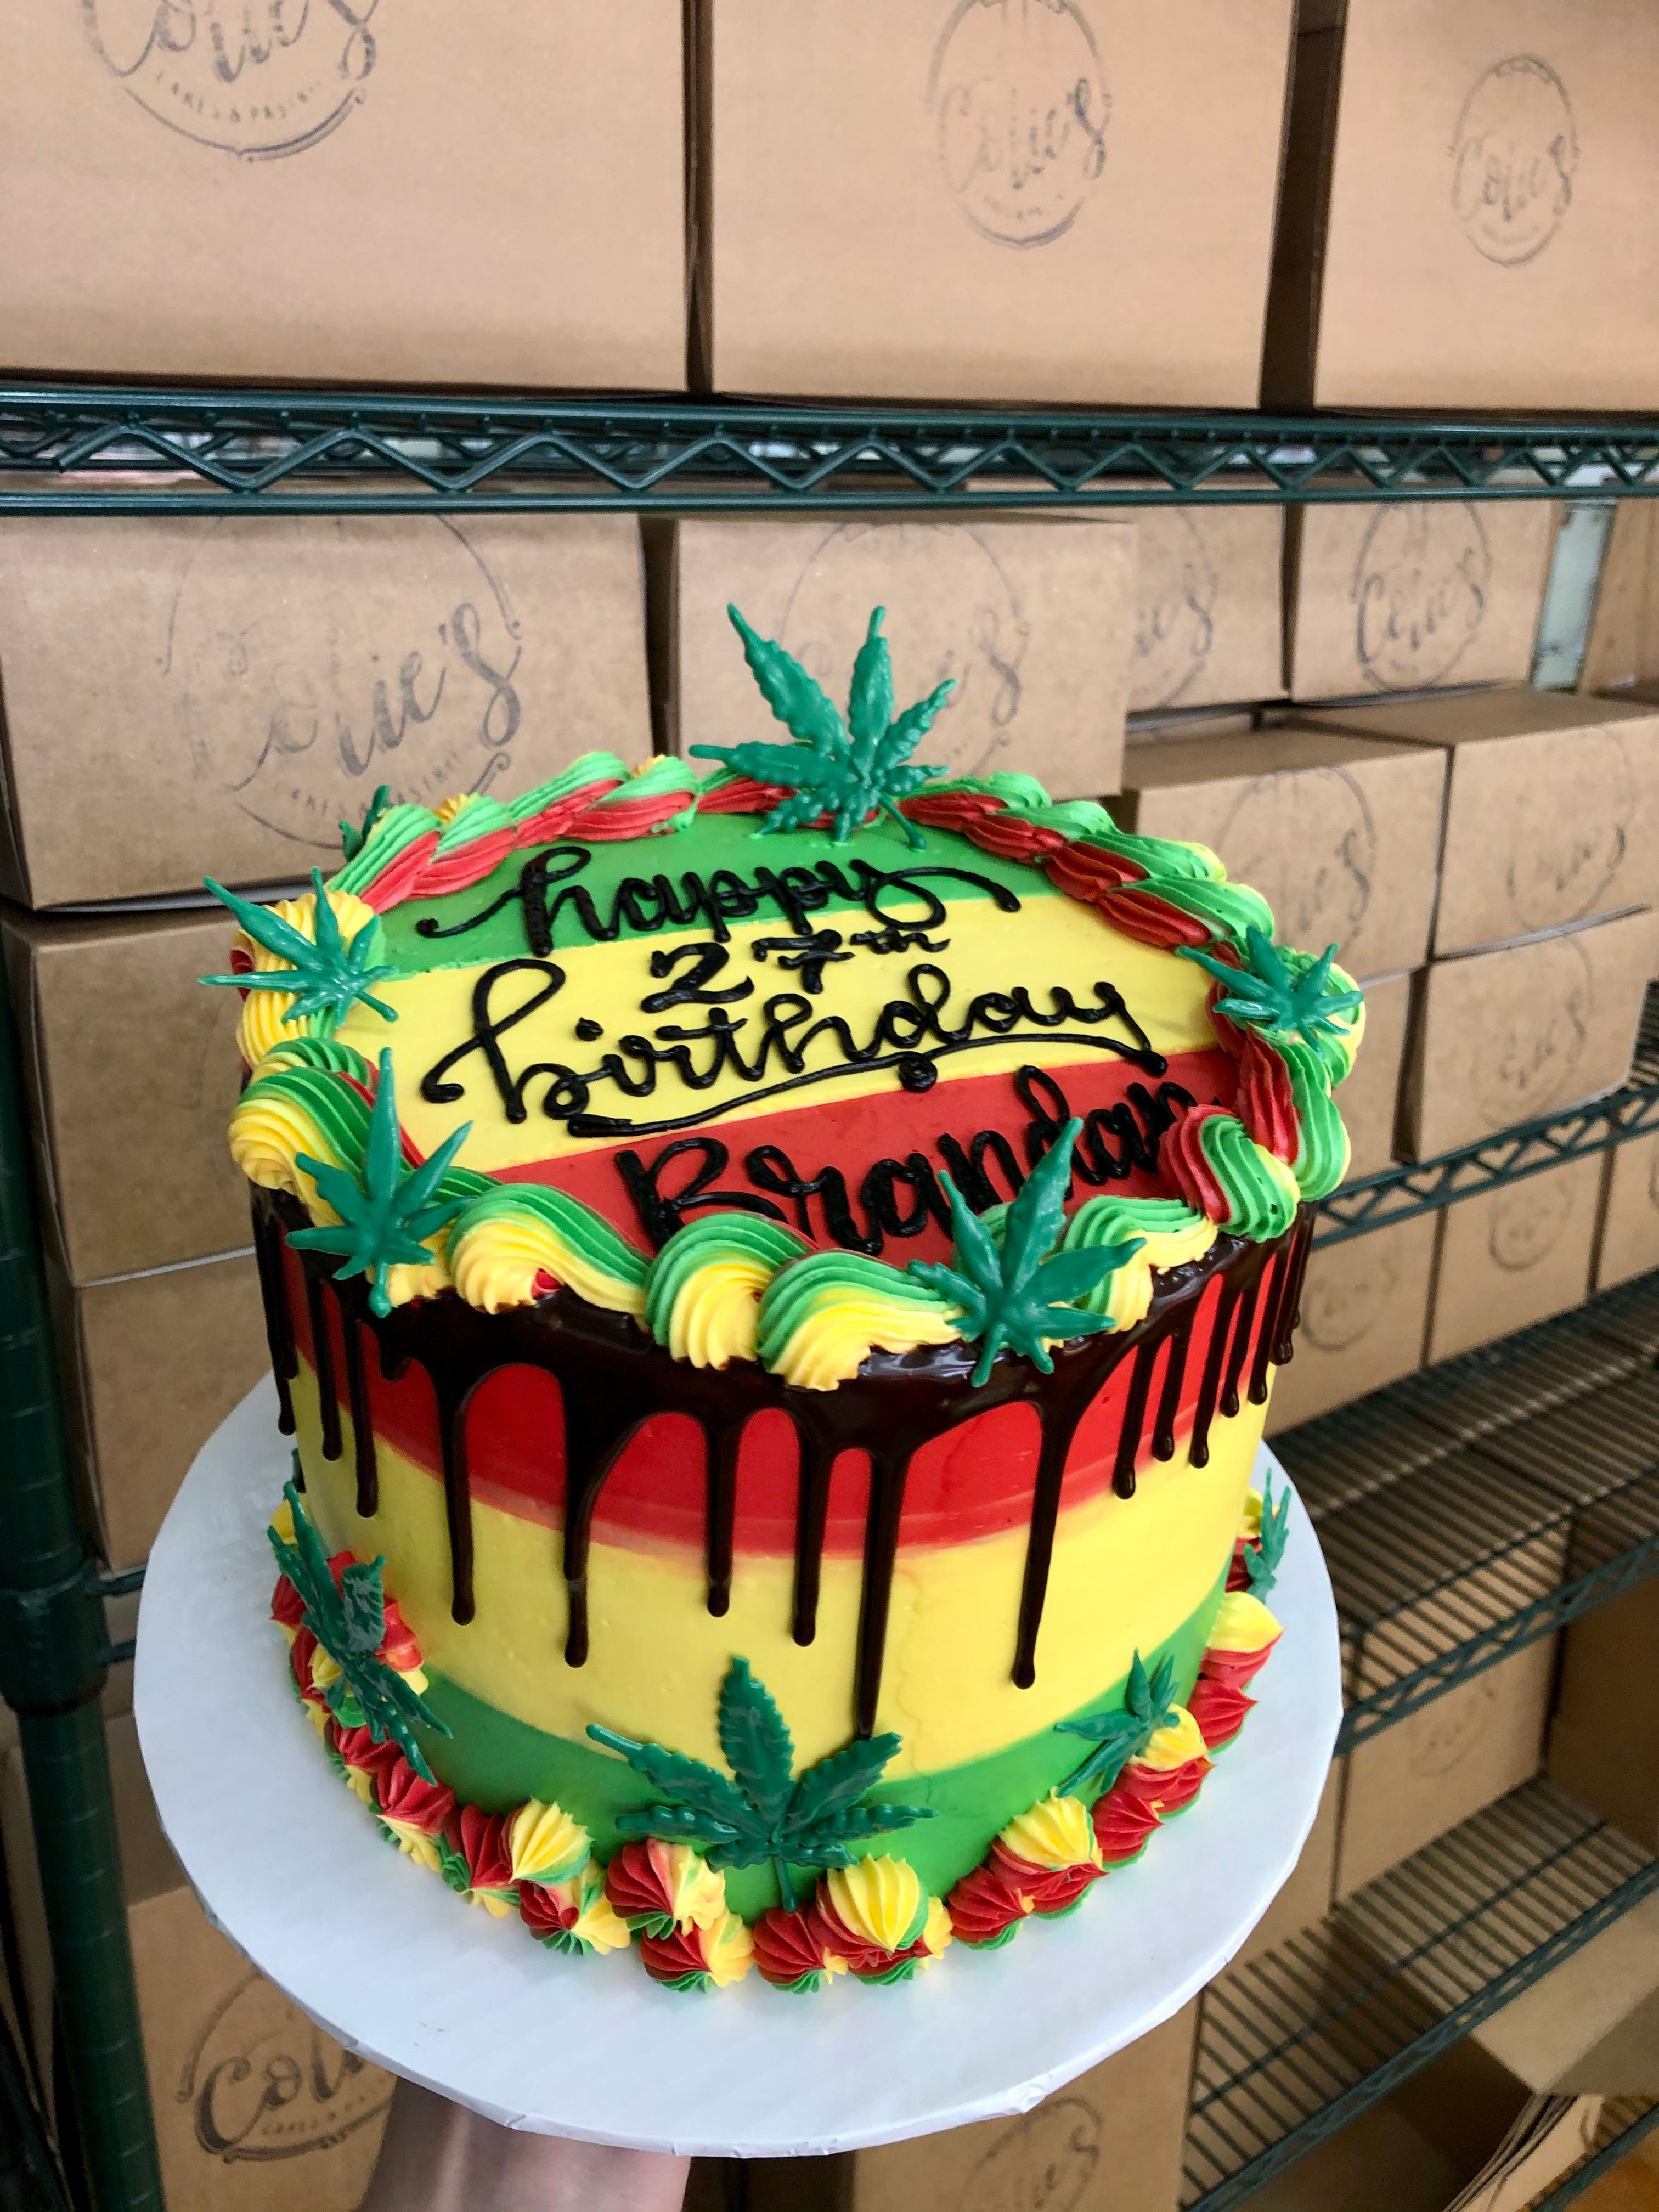 The baker creating sumptuous weed cakes to banish stoner stereotypes | Dazed